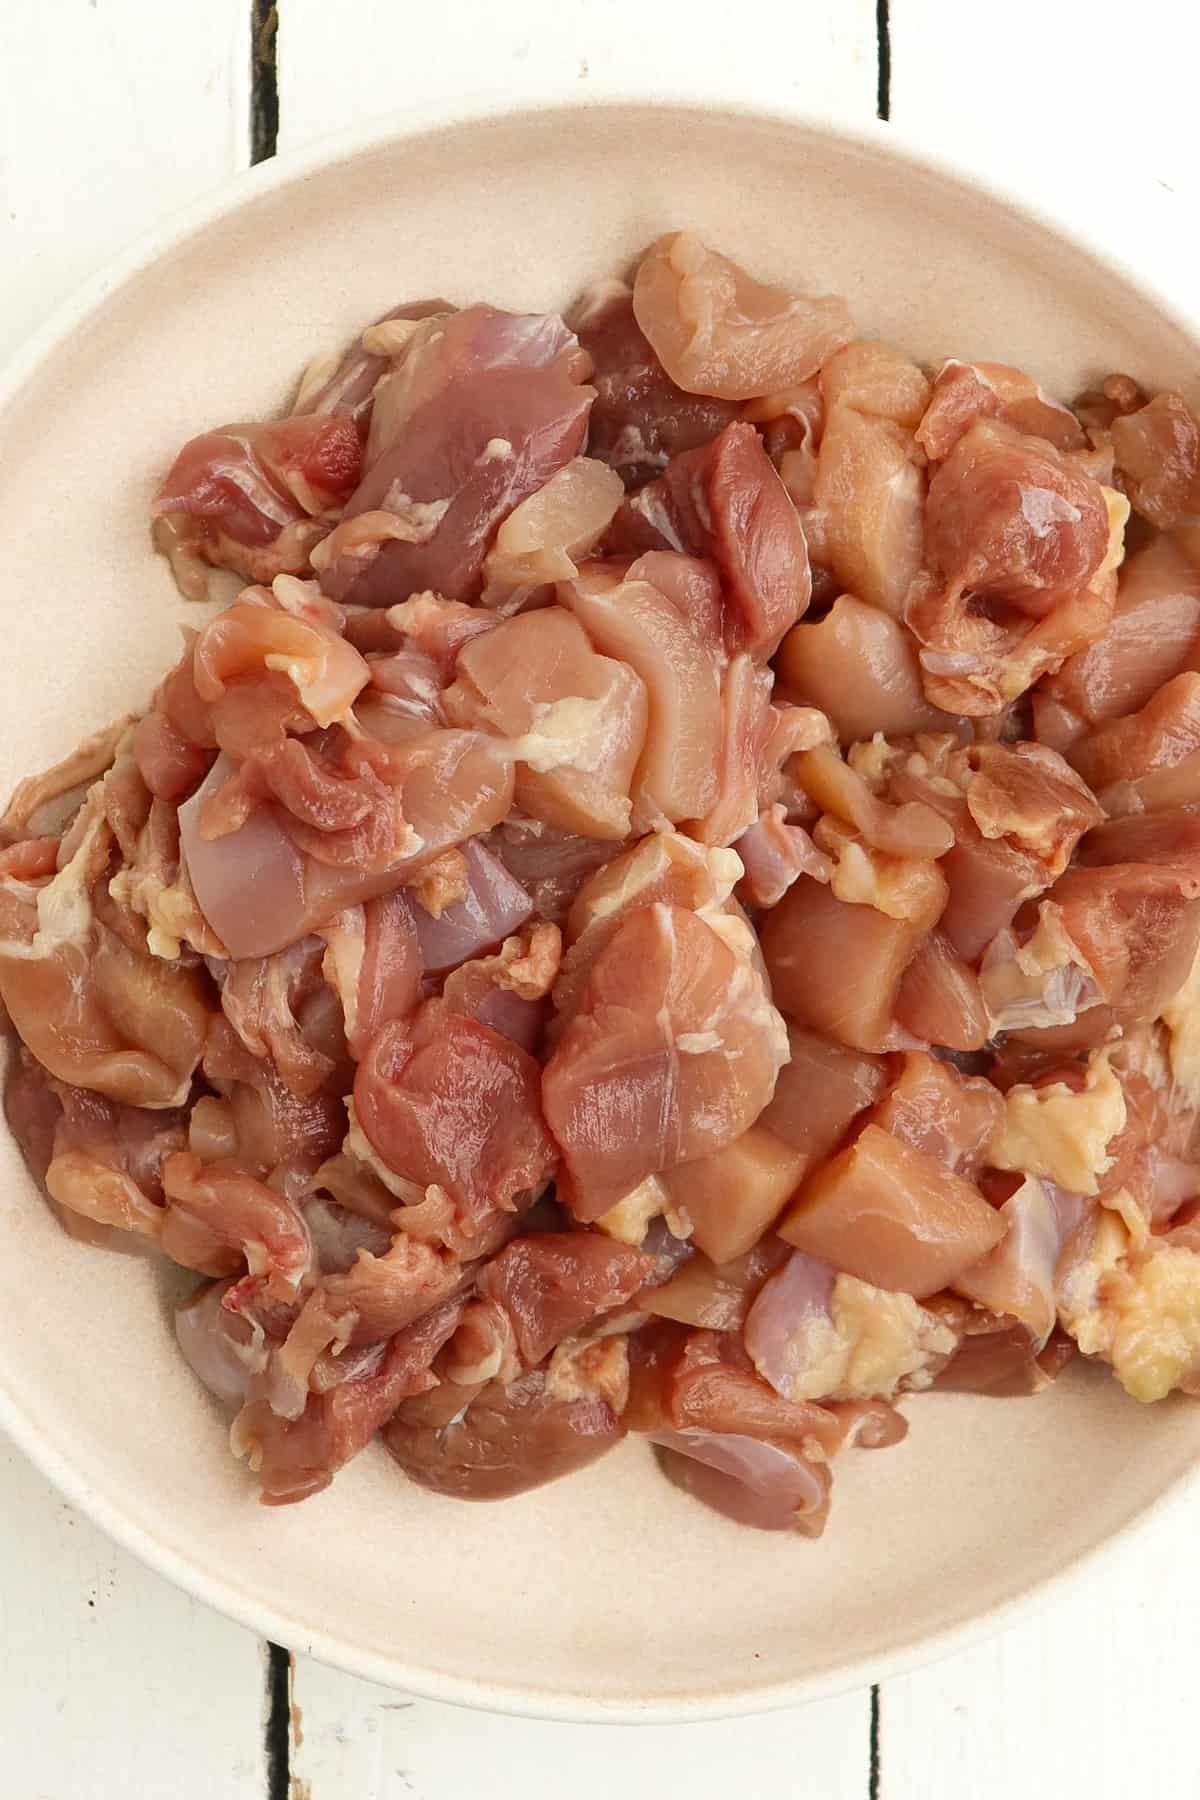 diced chicken thighs in a bowl.